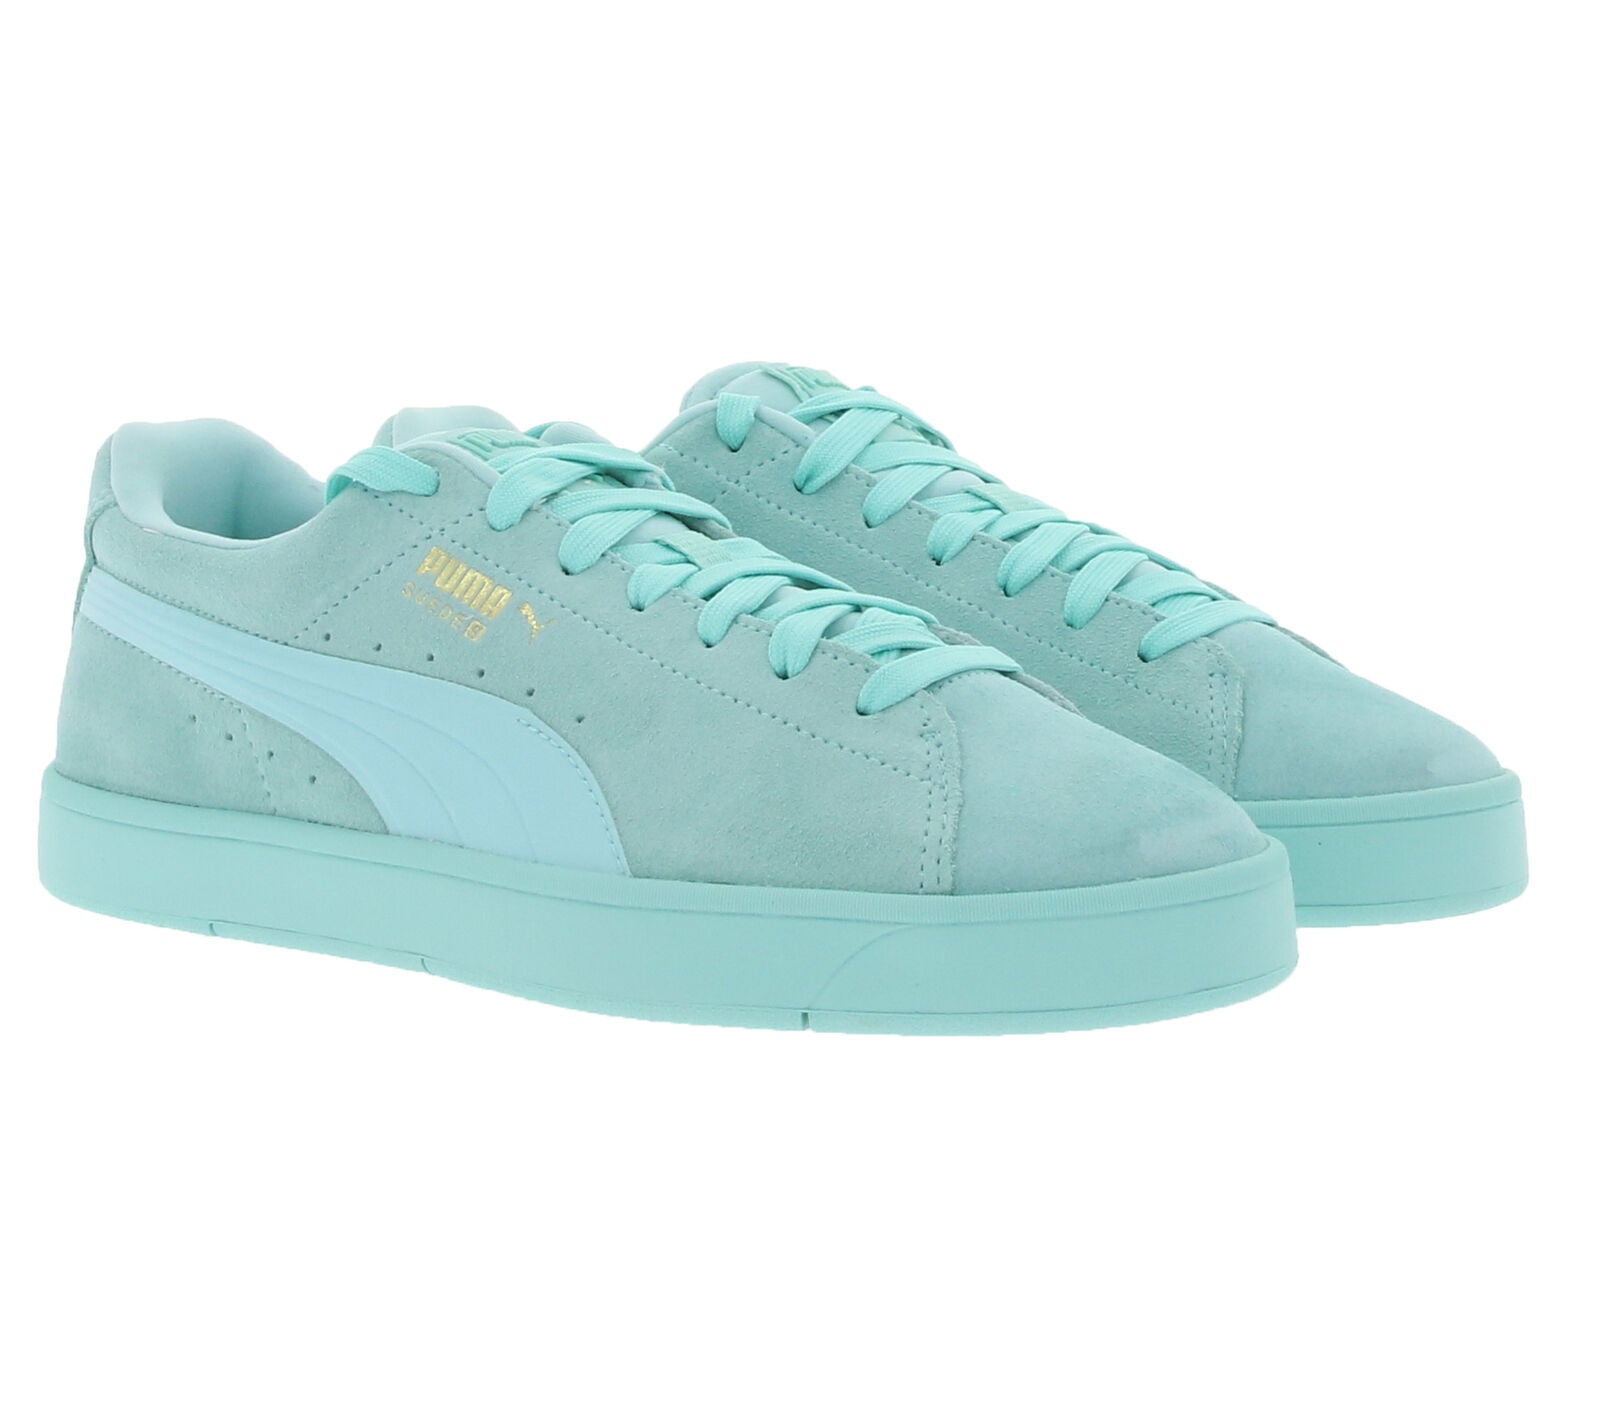 Waden hobby middag Puma Suede real leather Women's Trainers 364739-03 Sizes UK 3.5 to 8 –  Smfashiontrends